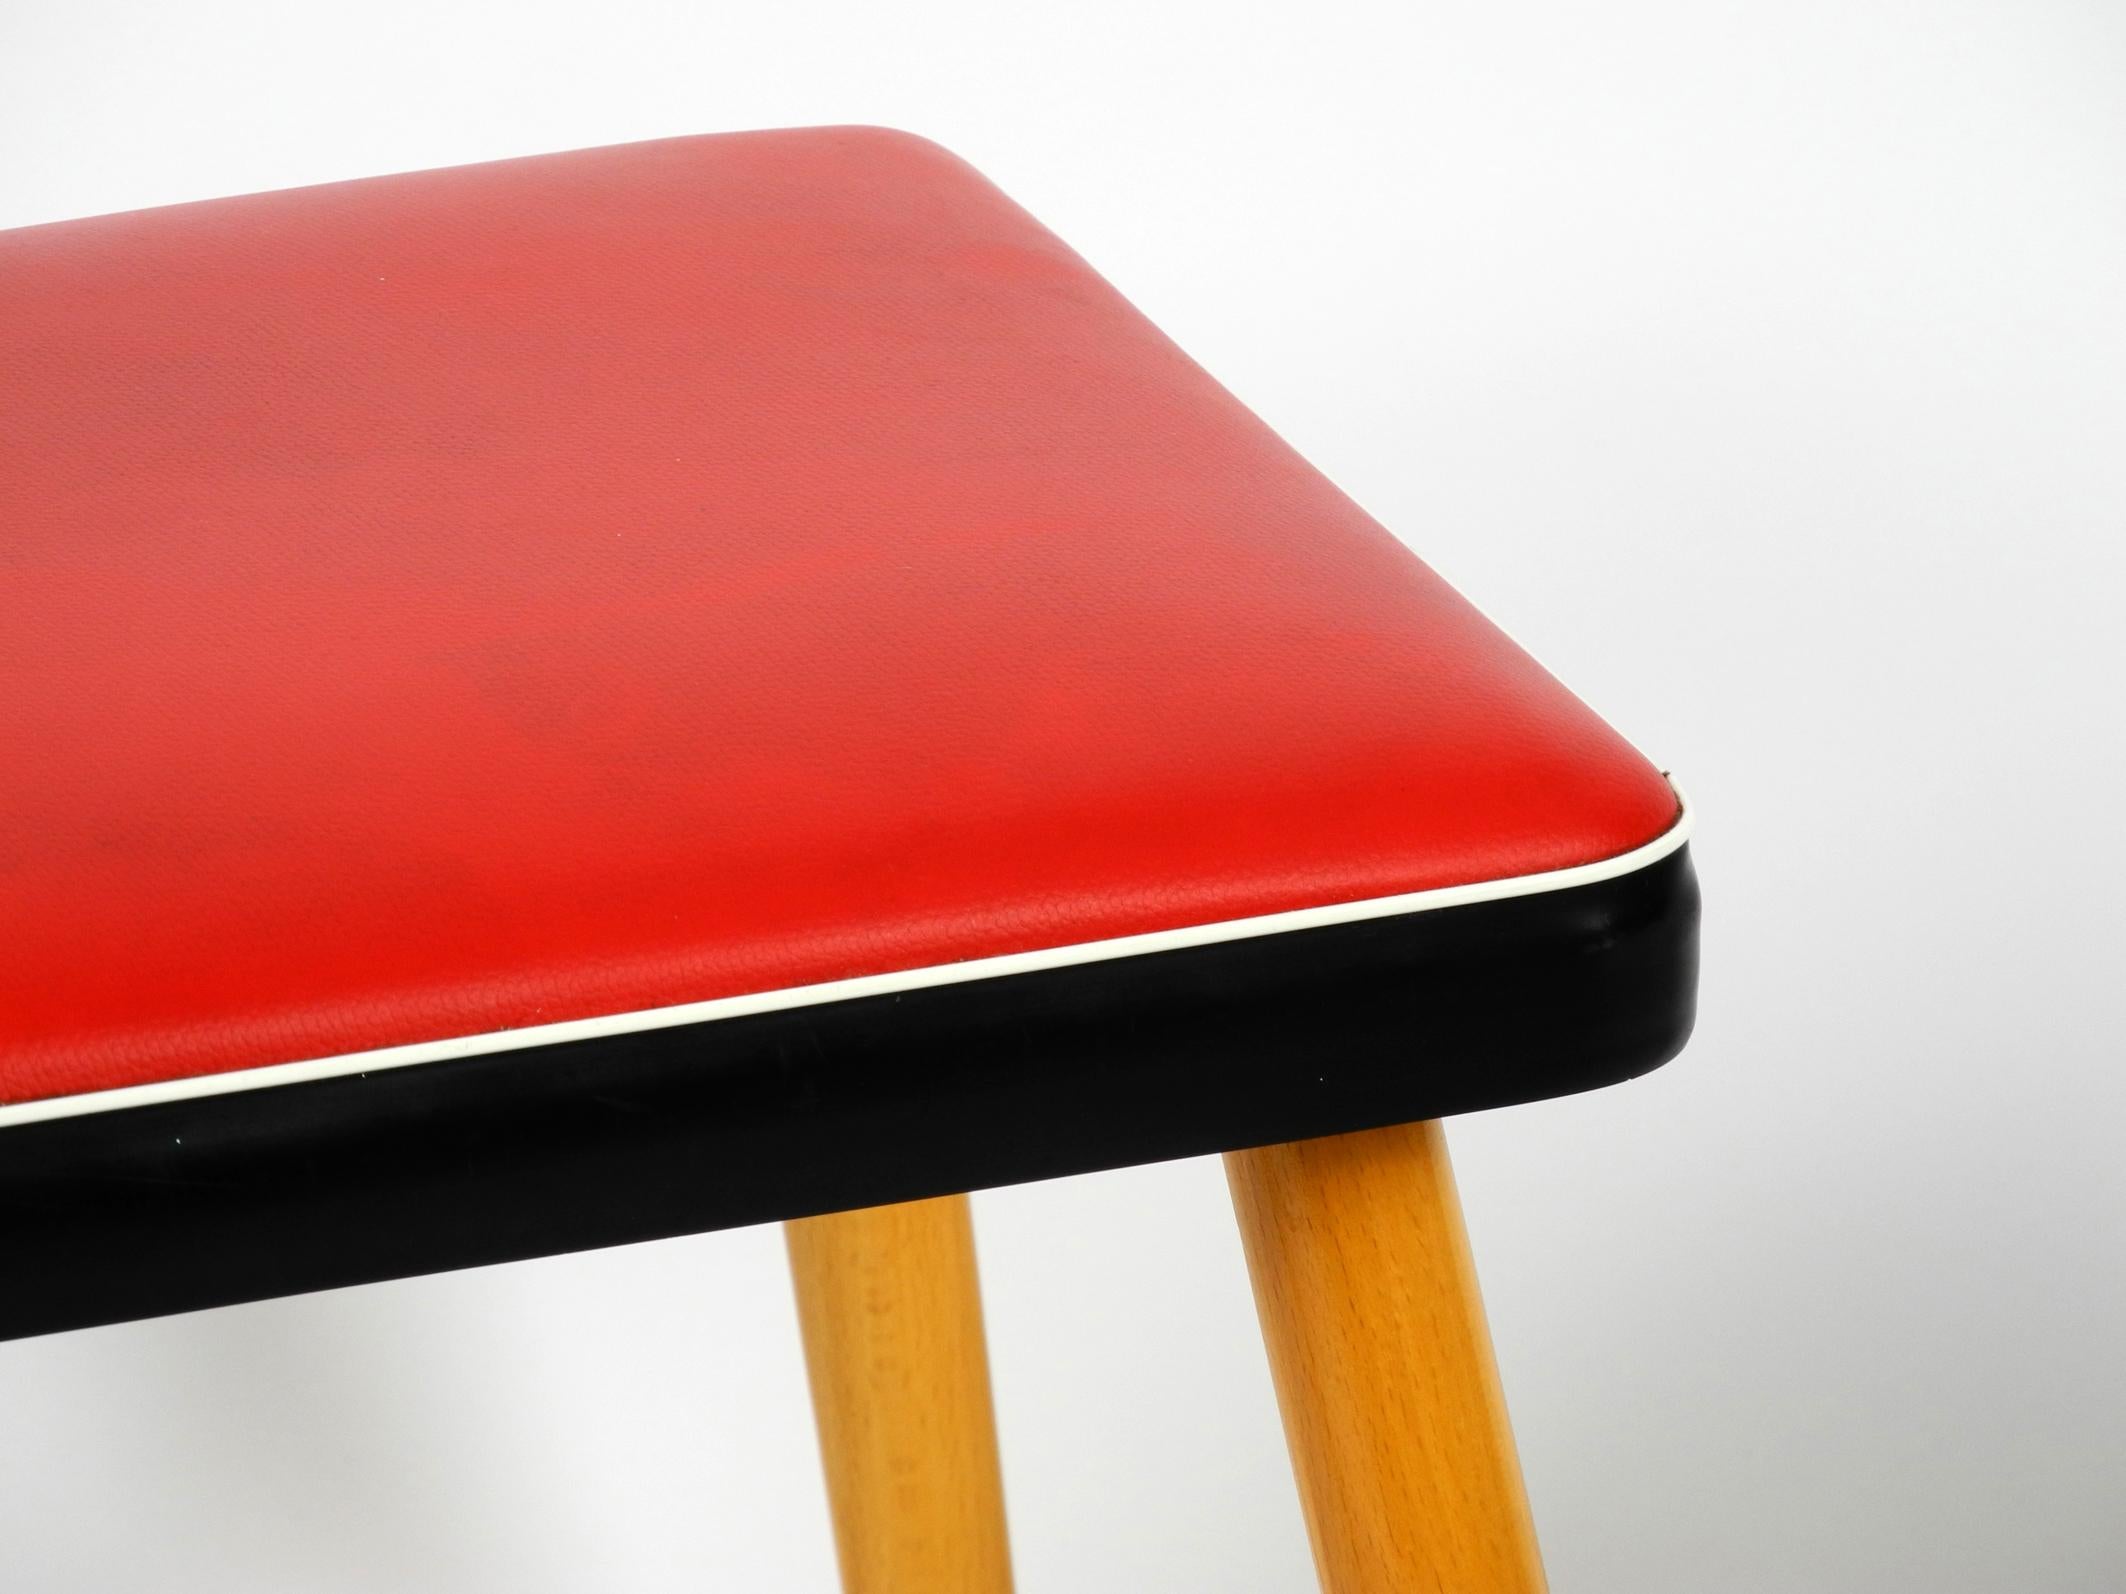 Pair of Almost Mint Midcentury Wooden Stools with Red Faux Leather Cover in Red 6